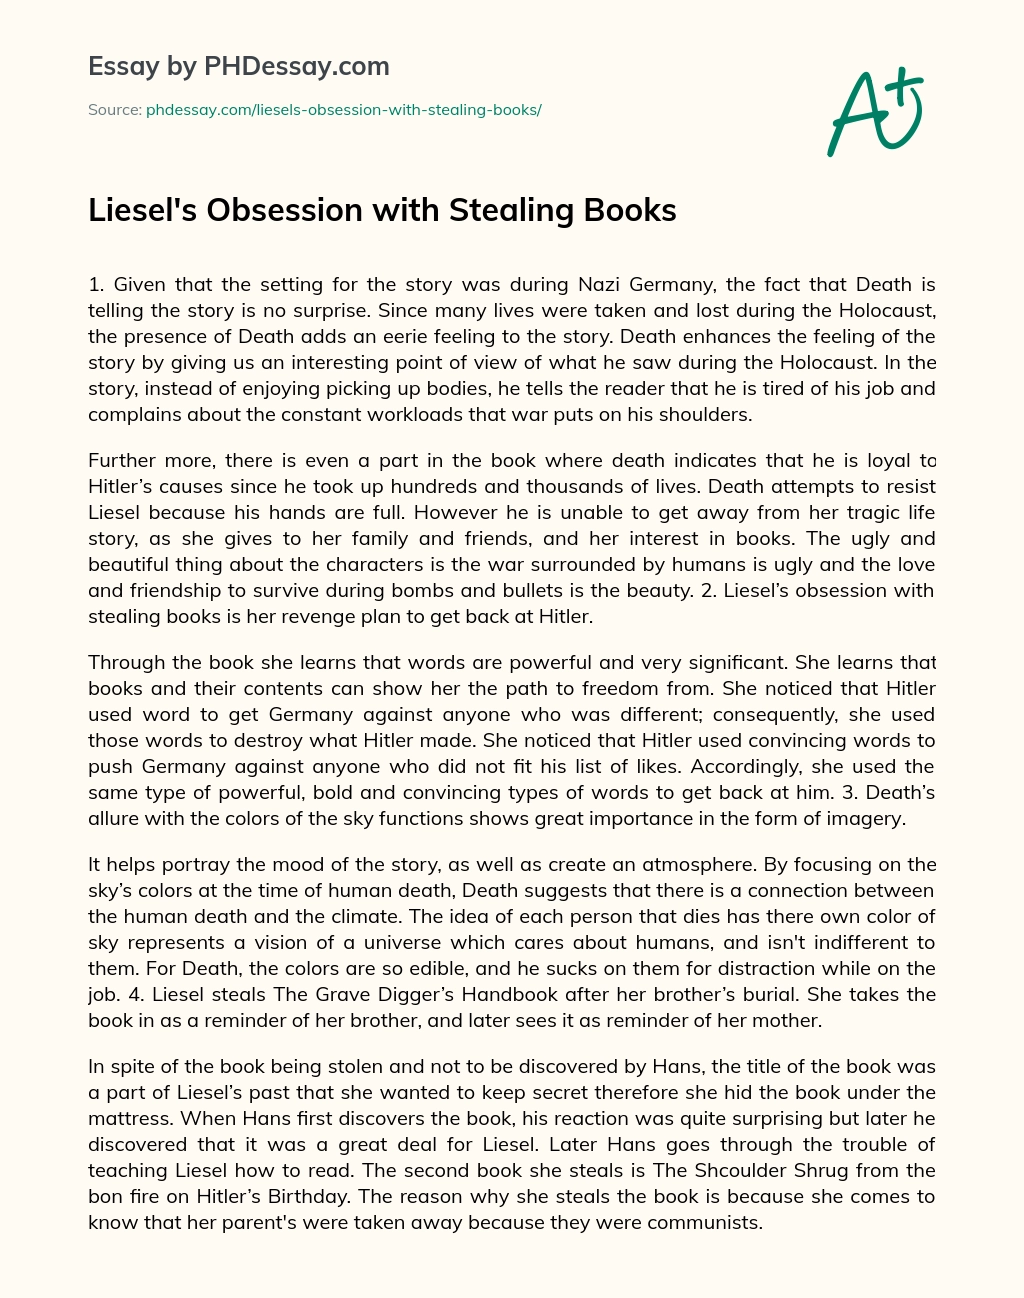 Liesel’s Obsession with Stealing Books essay